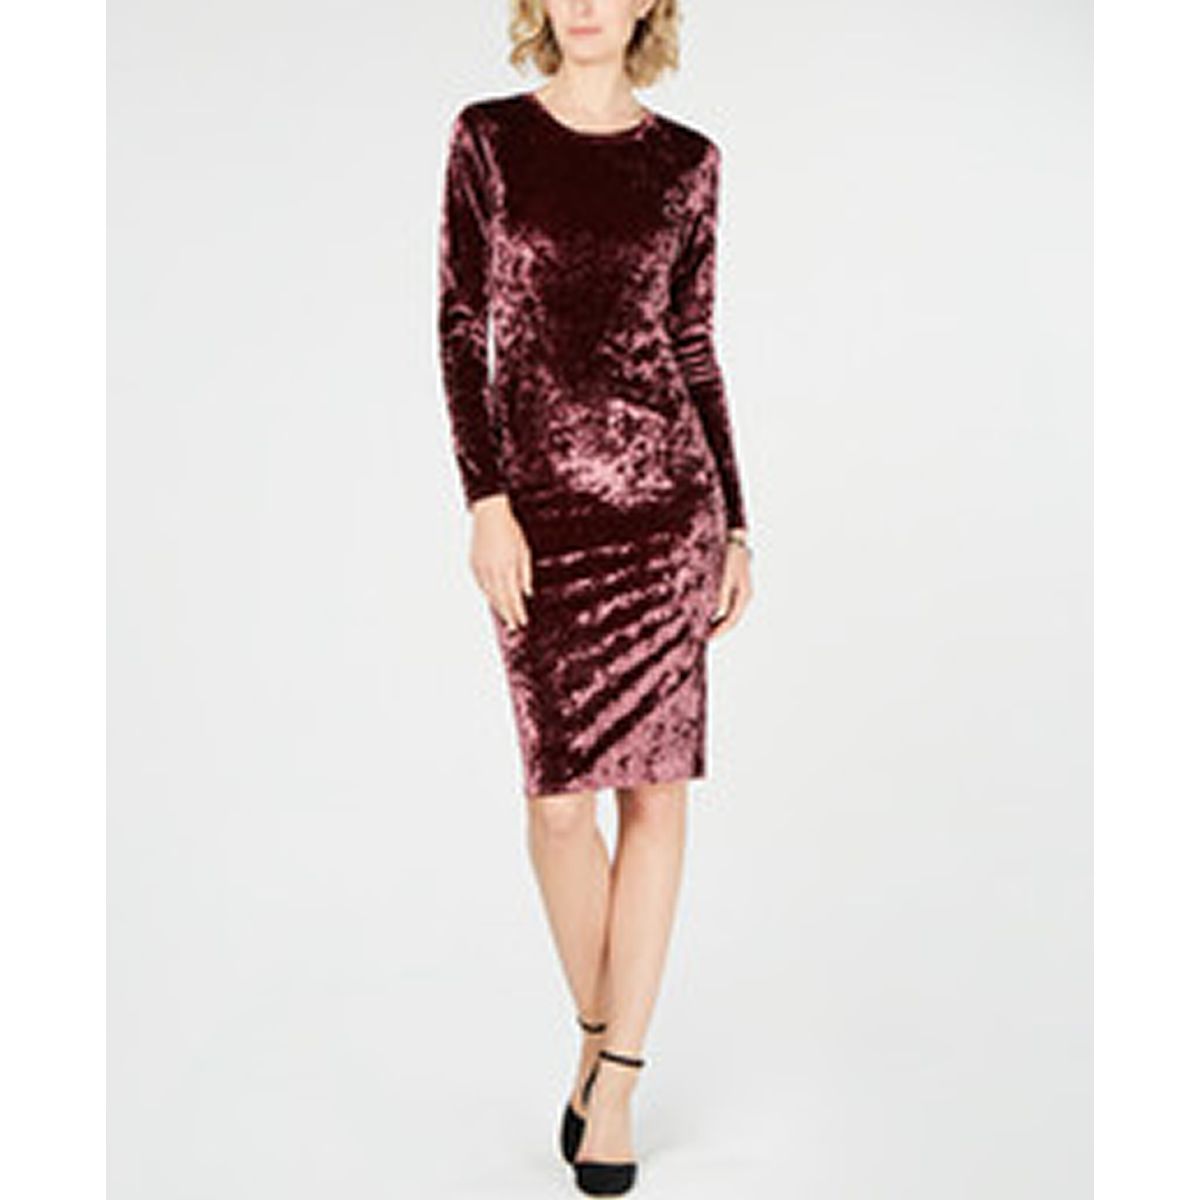 Special michael kors collection dresses made in italy today shanghai hot online